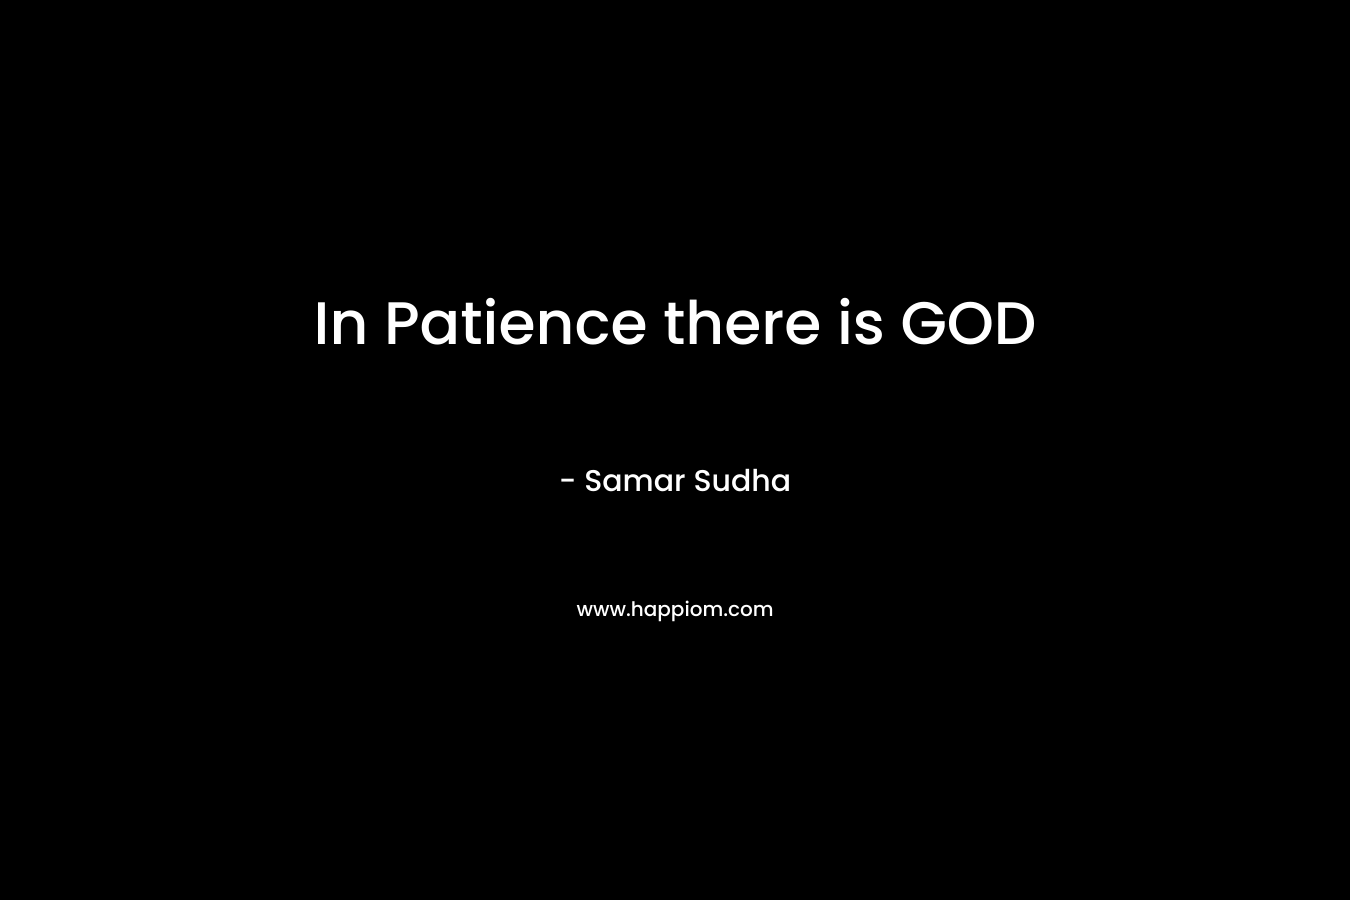 In Patience there is GOD